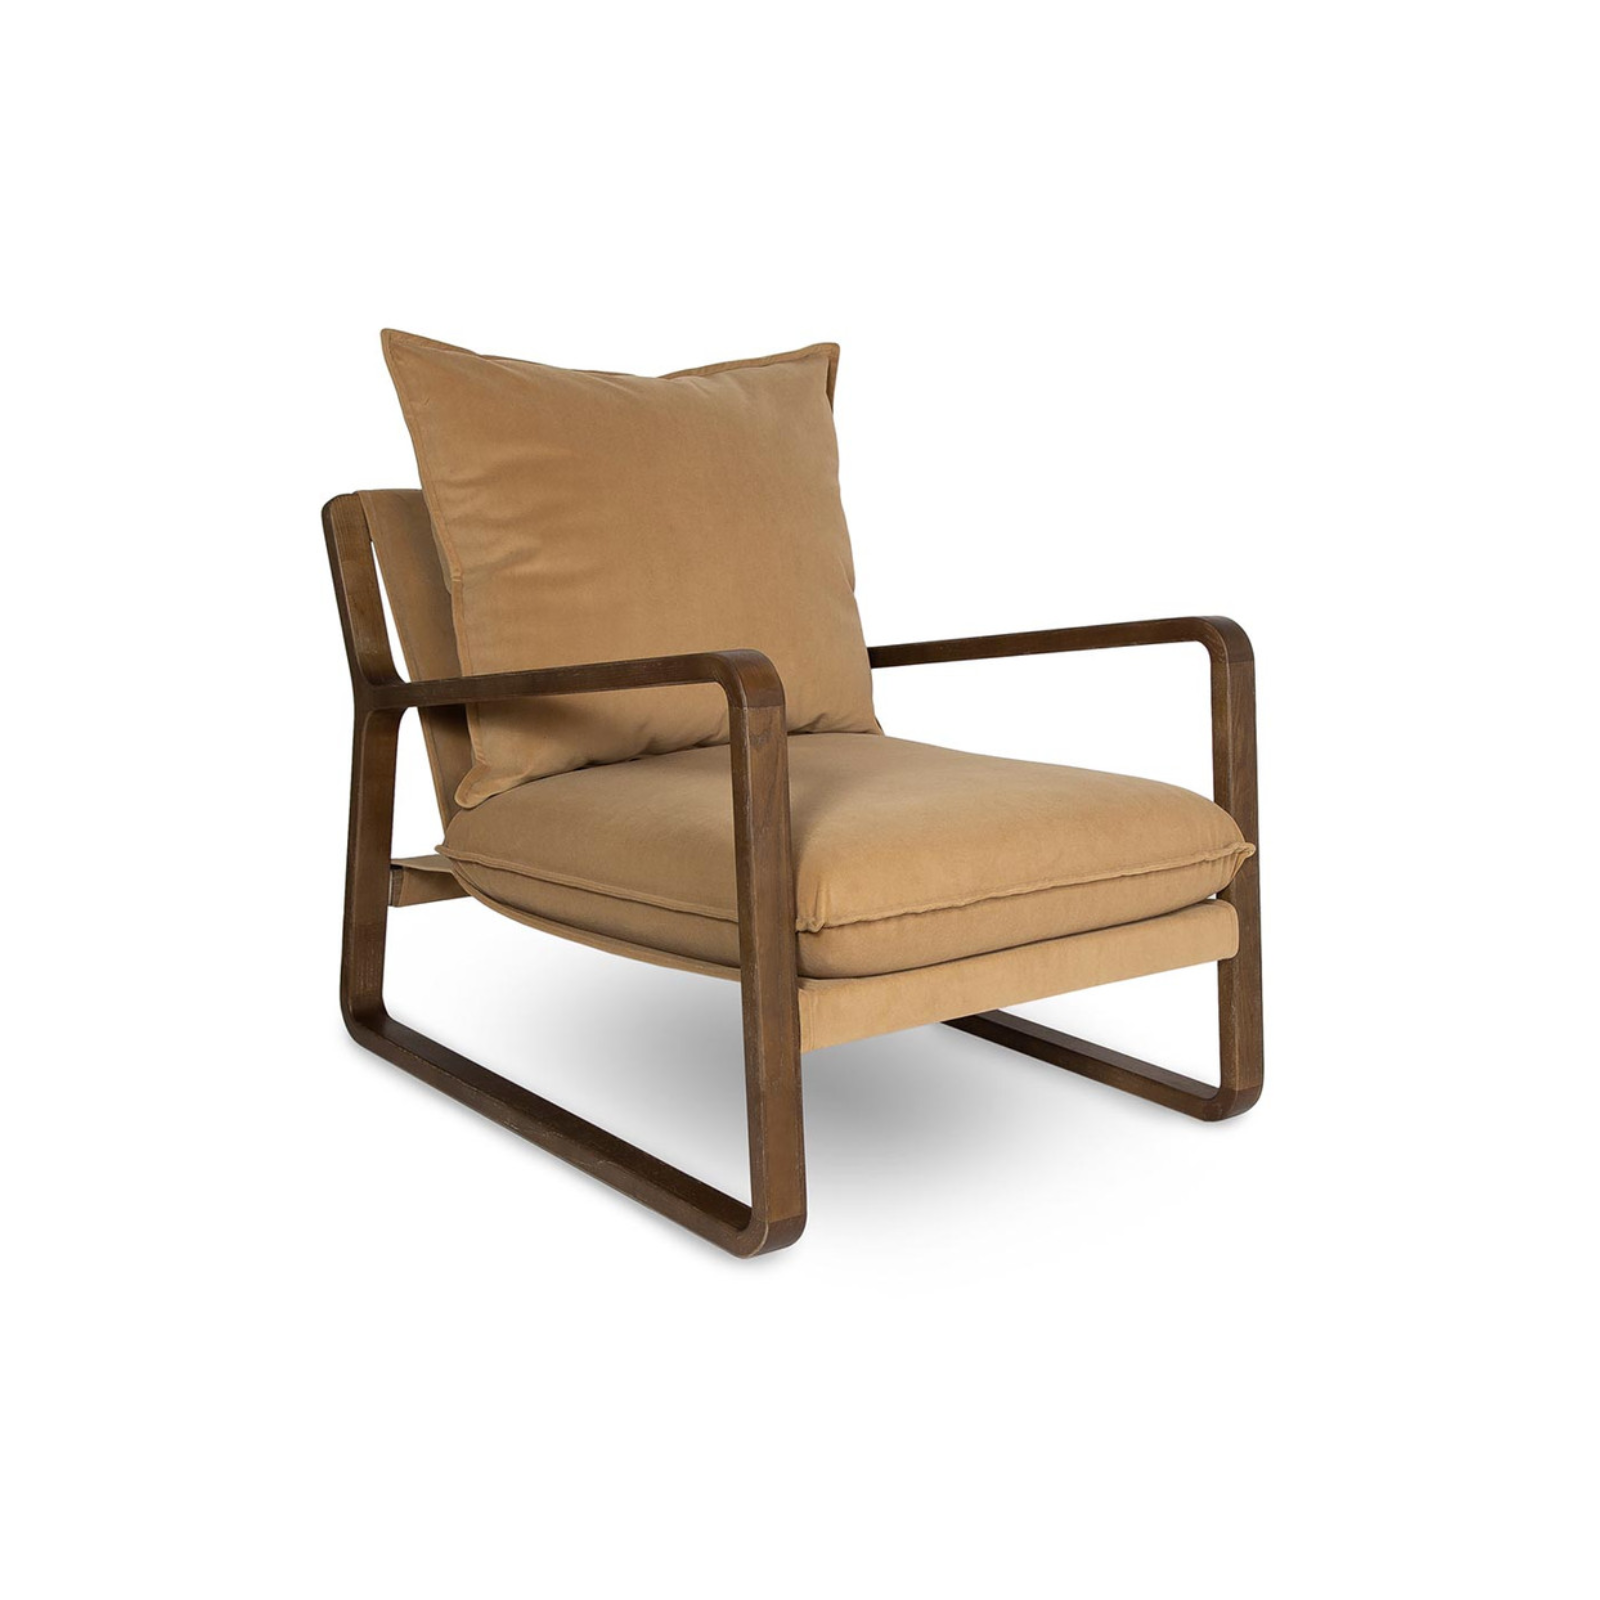 Sully Sling Chair - Camel